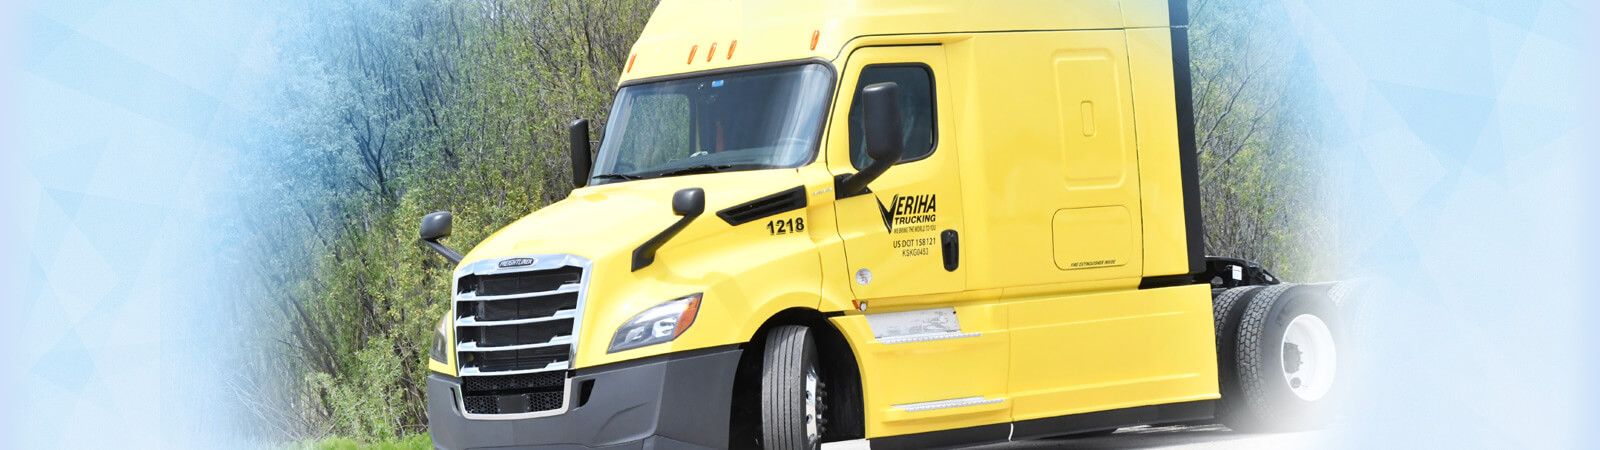 Veriha Trucking - Get a Quote